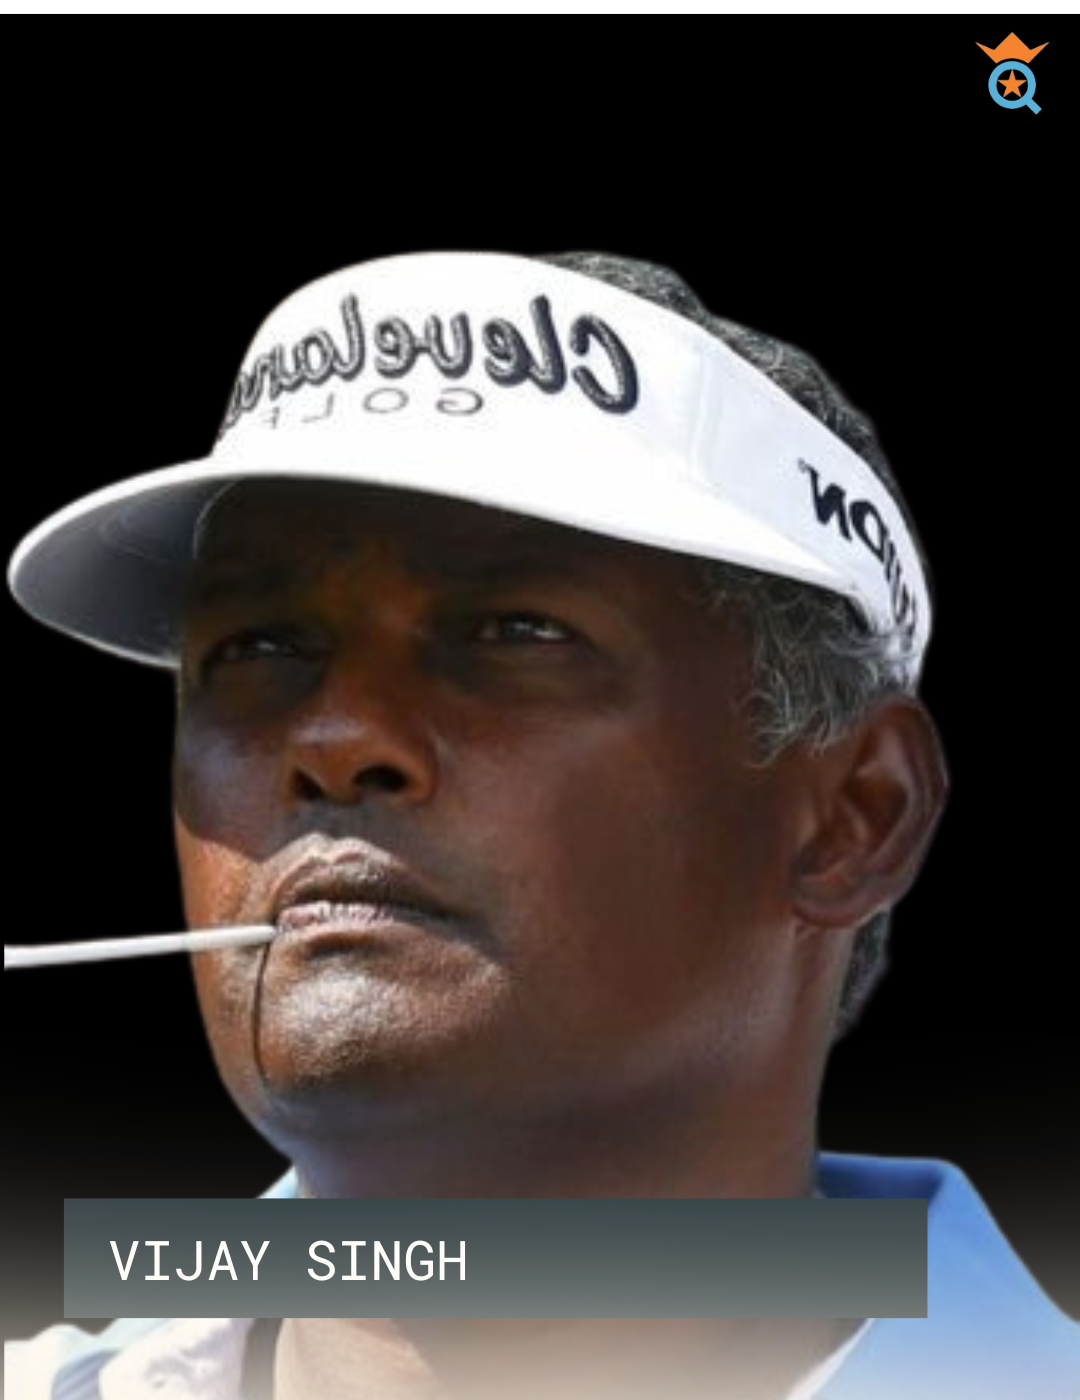 Best Golf Players of All Time, Vijay Singh